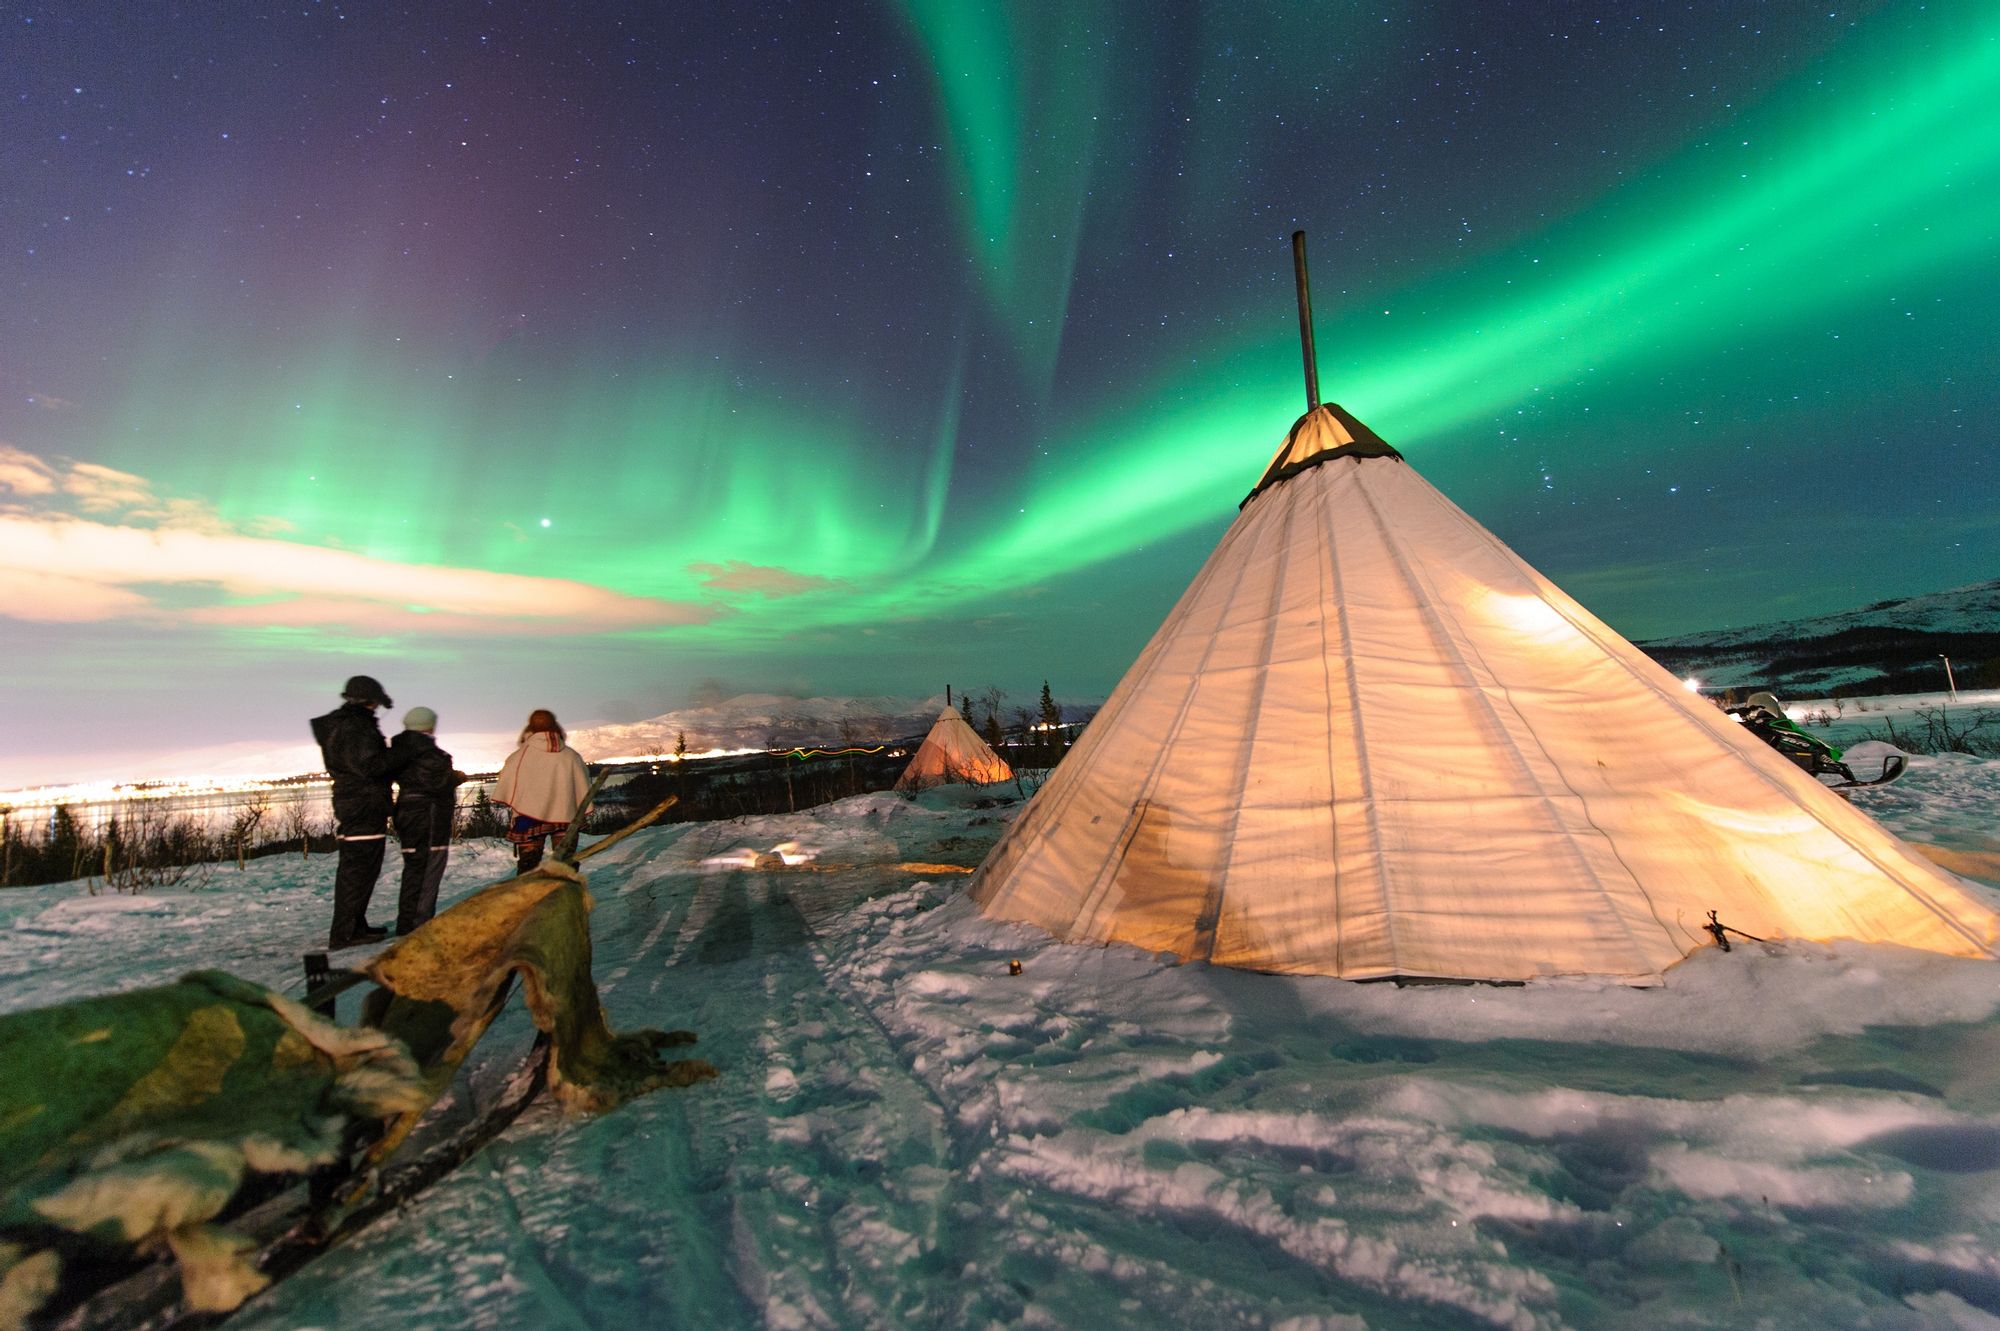 A bell tent beneath the aurora borealis, with snow and forest all around.